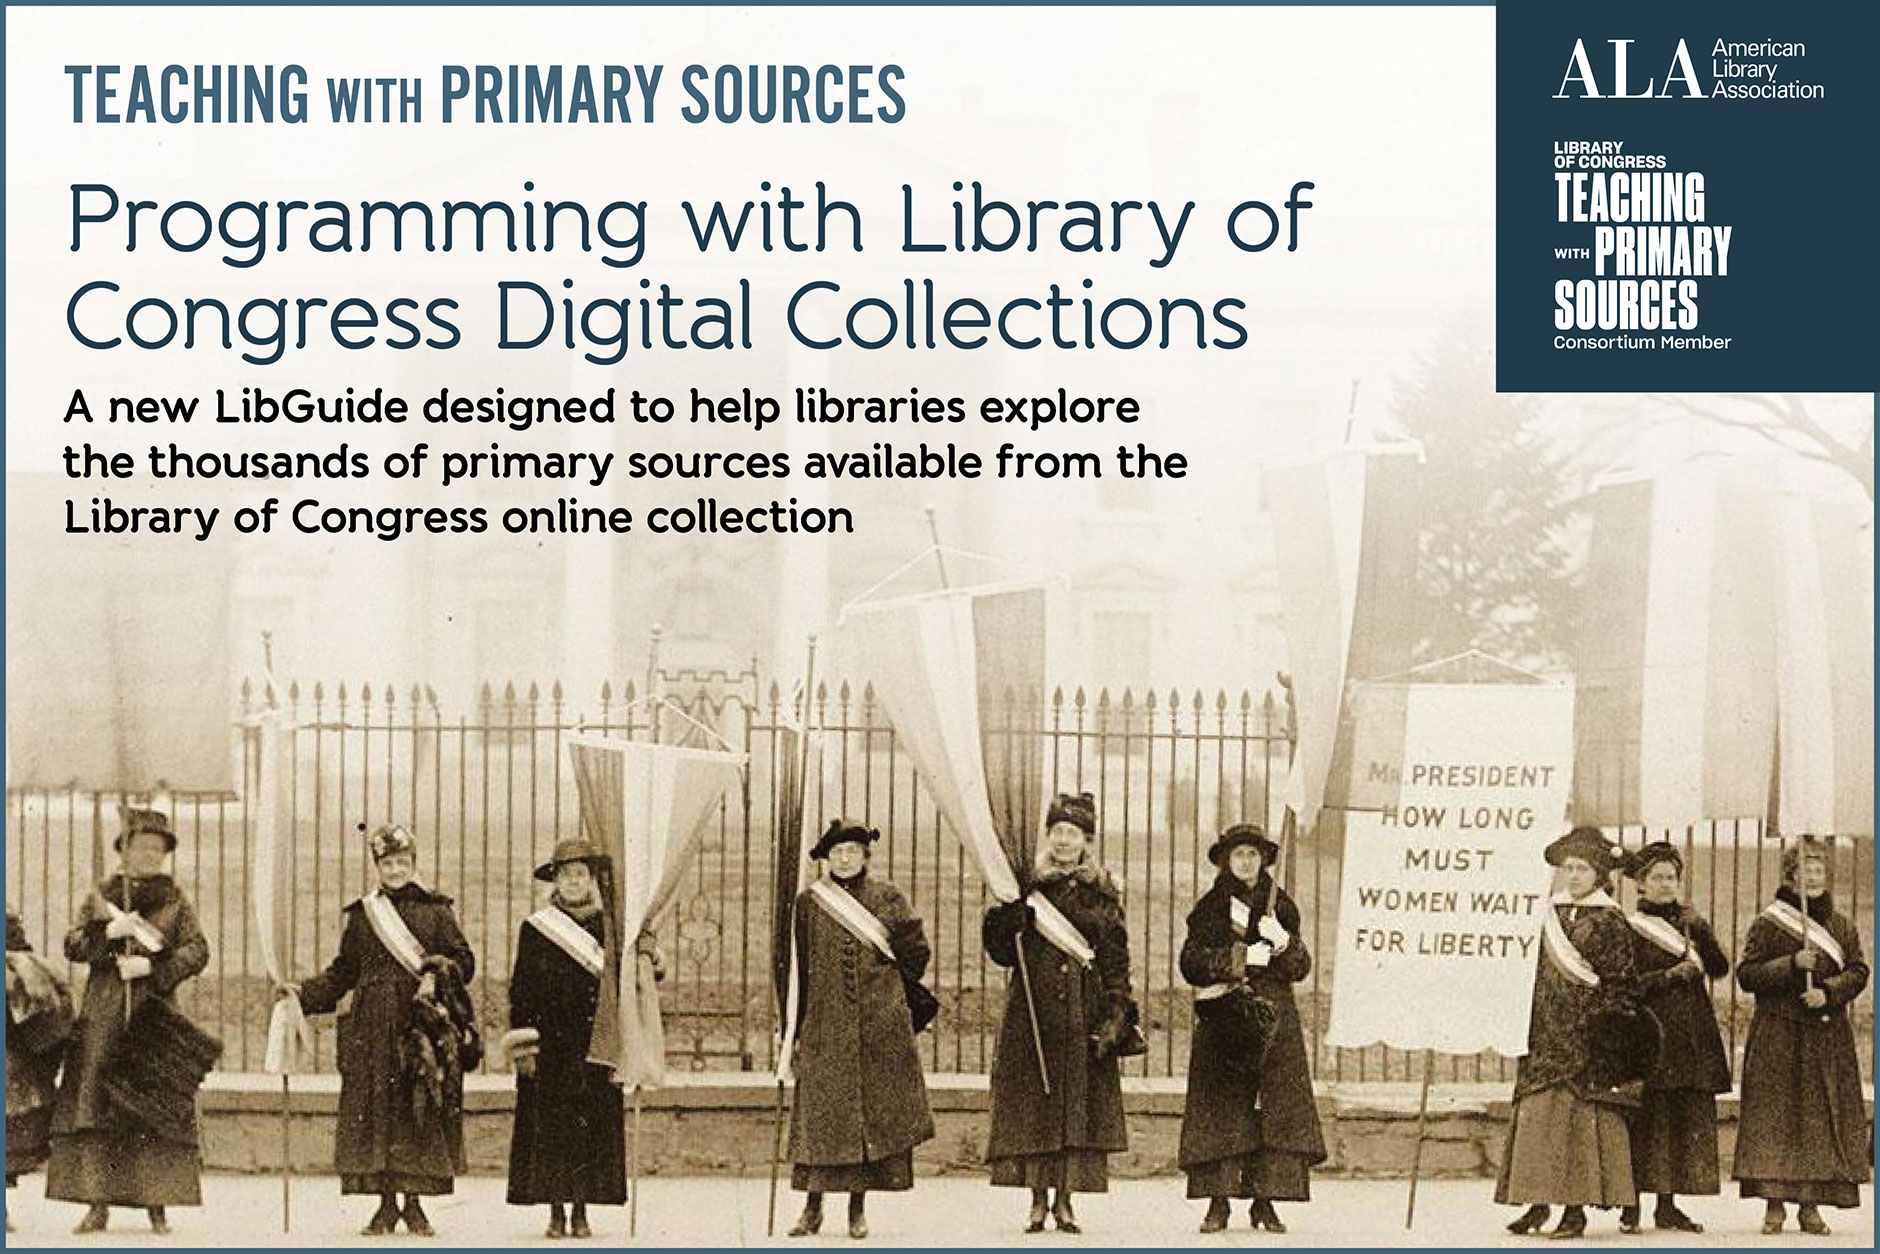 A sepiatone photo of suffragettes with text overlaid: "Teaching with Primary Sources, programming with Library of Congress digital collections. A new LibGuide designed to help libraries explore the thousands of primary sources available from the Library of Congress online collection."